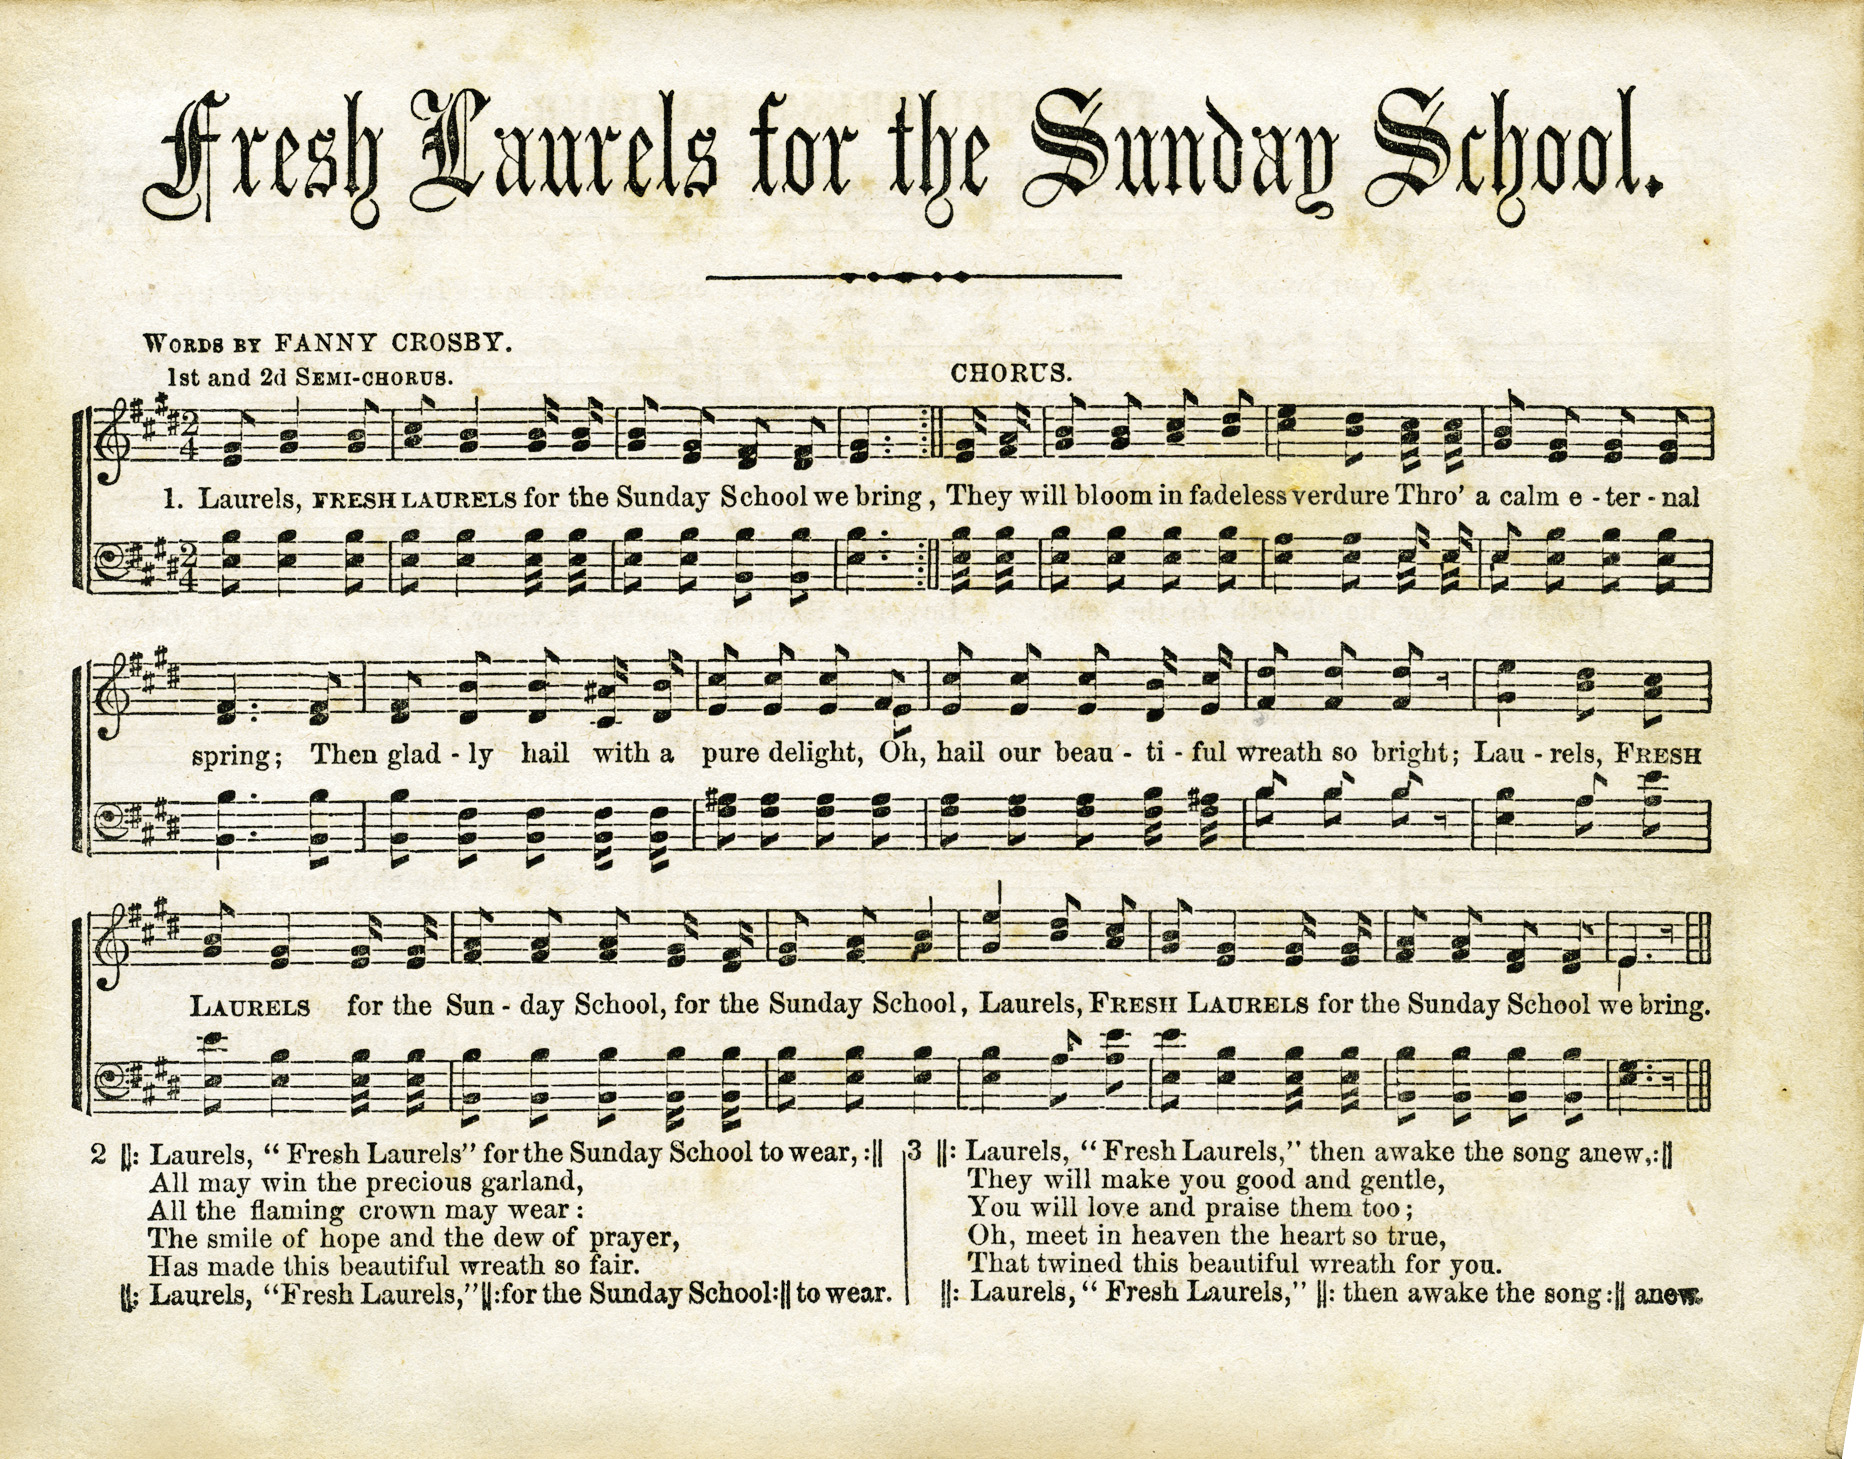 free vintage clipart religious, old sheet music, vintage christian music, old sunday school song, antique hymn, vintage ephemera, music, grunge page, aged music page